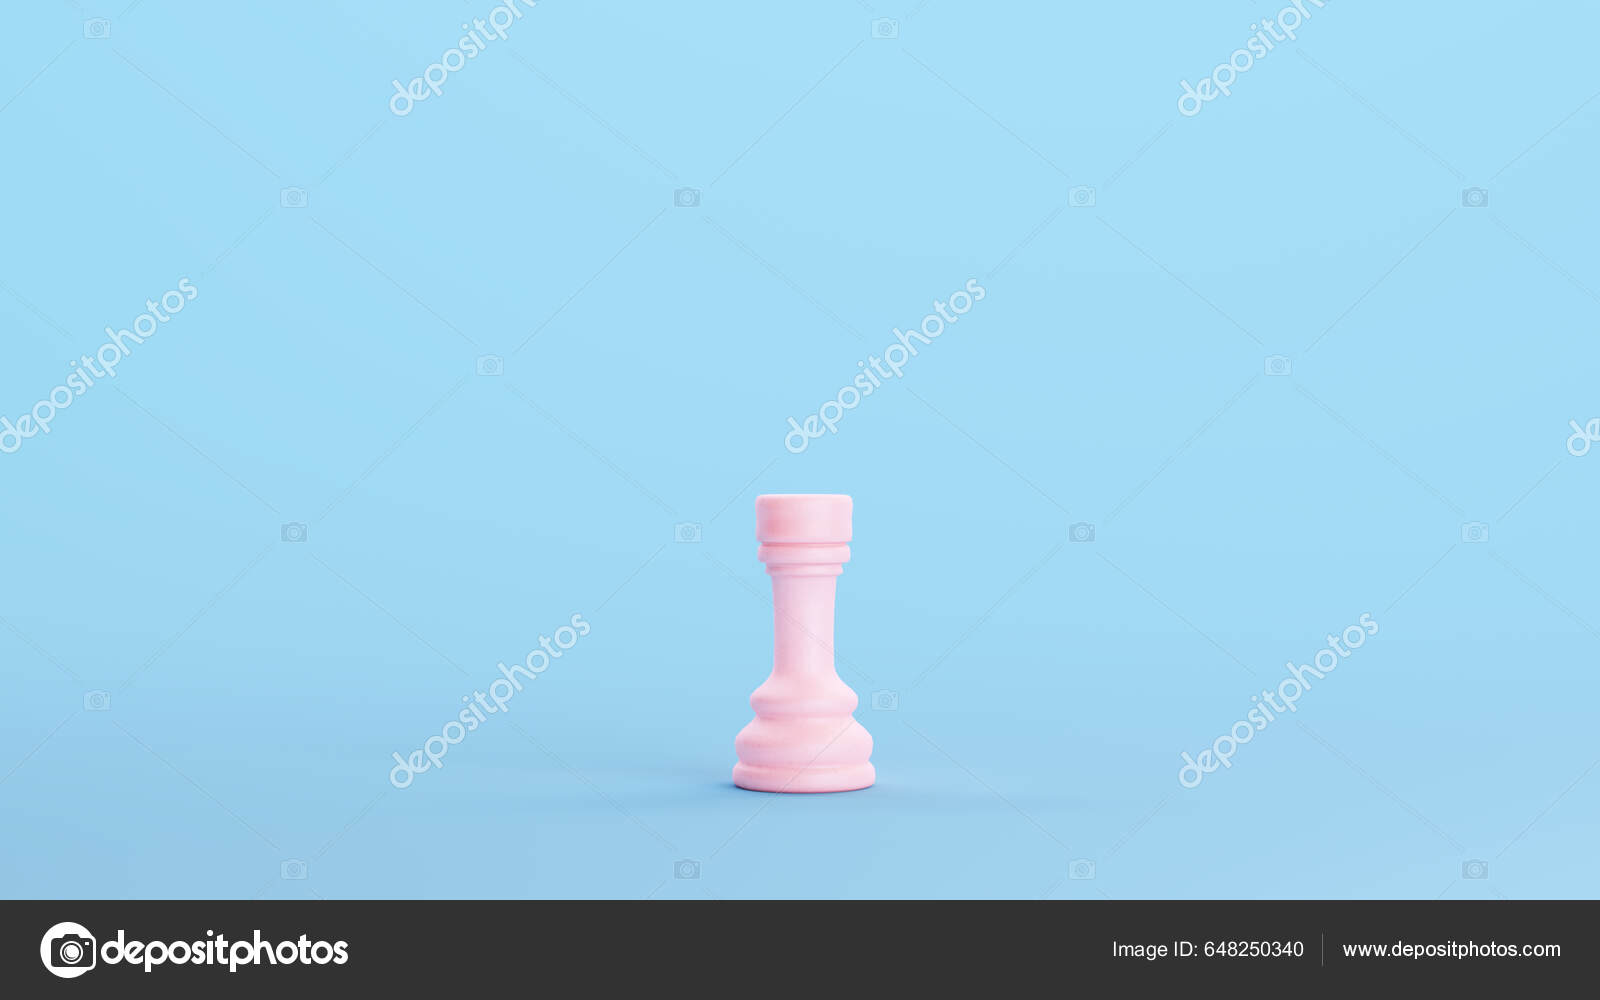 Strategic Game Of Chess 3d Rendered Chess Board And Clock On Blue